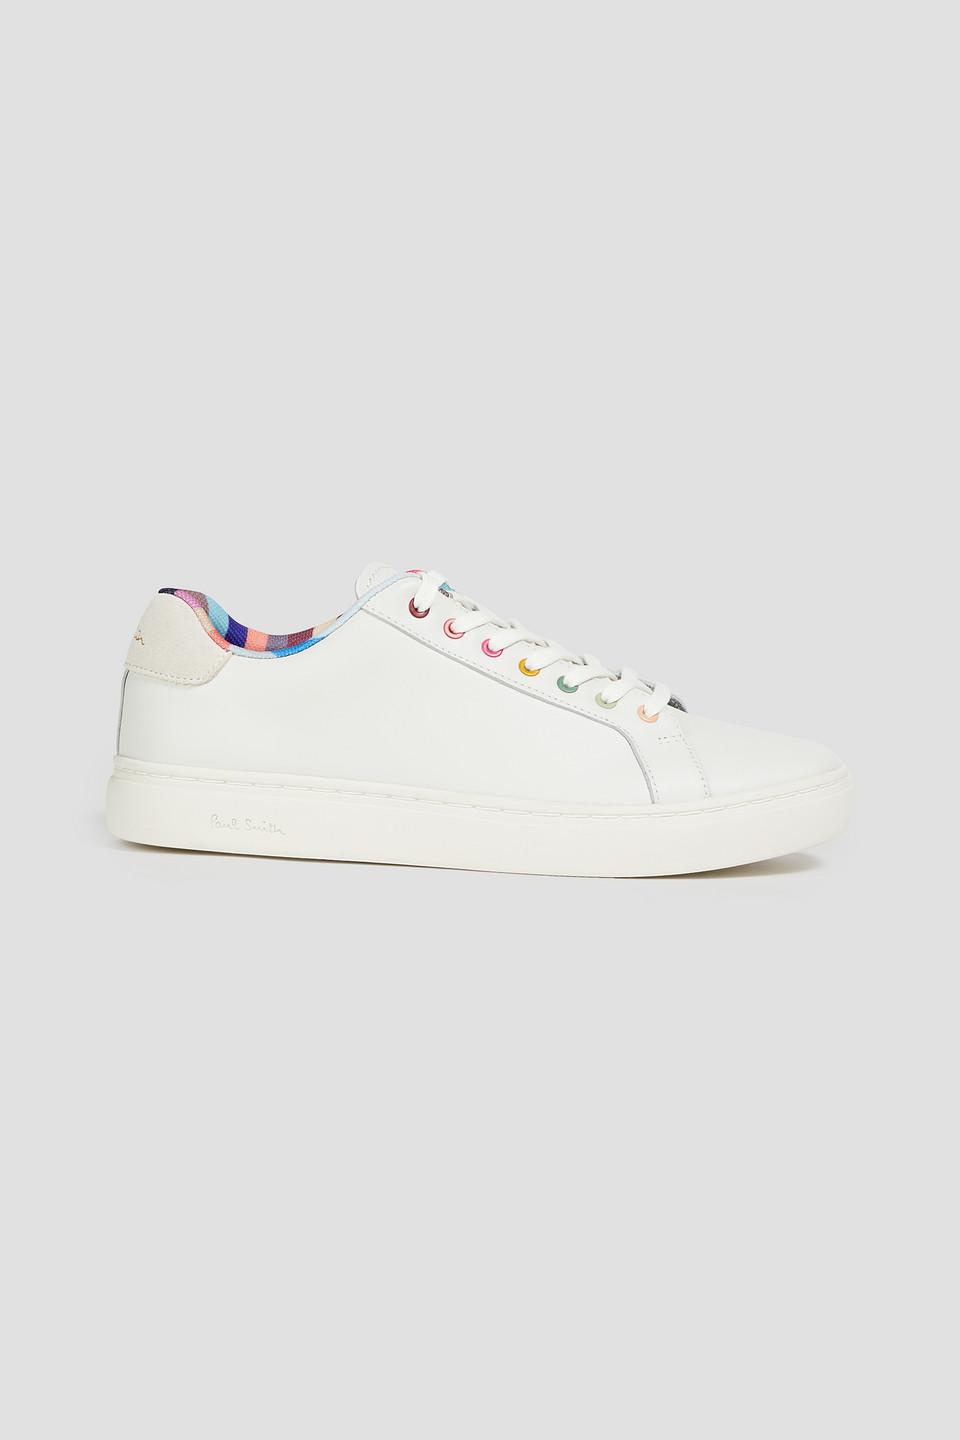 Paul Smith Lapin Leather And Suede Sneakers in White | Lyst